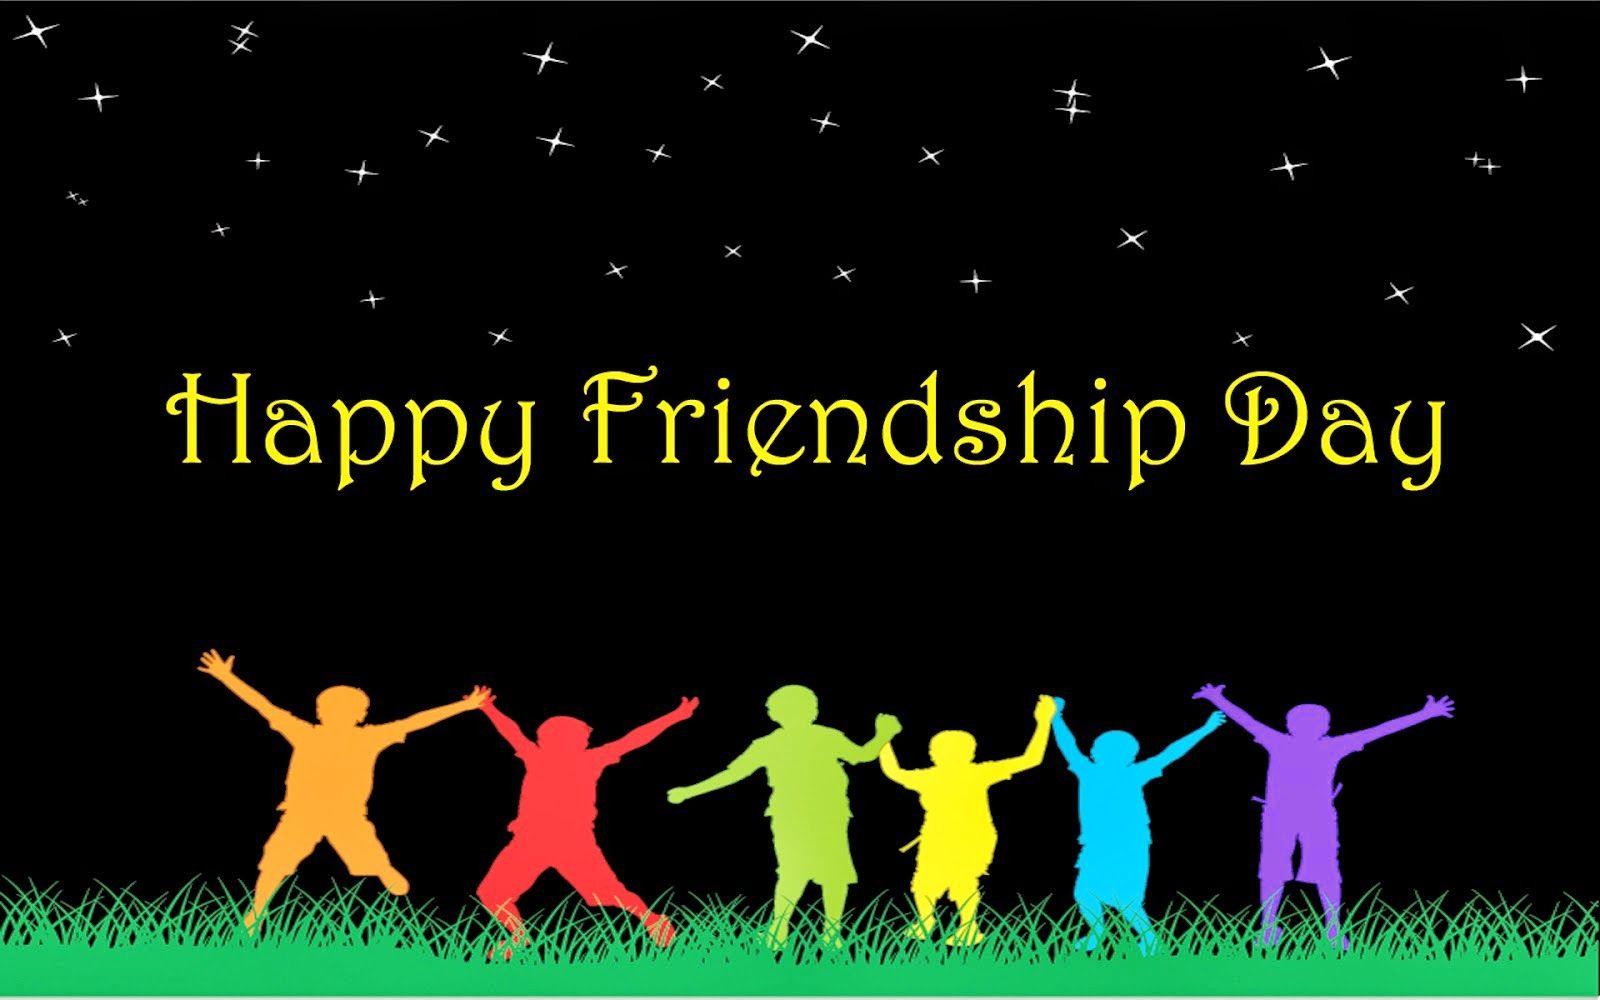 Happy Friendship Day Red Rose HD Wallpaper